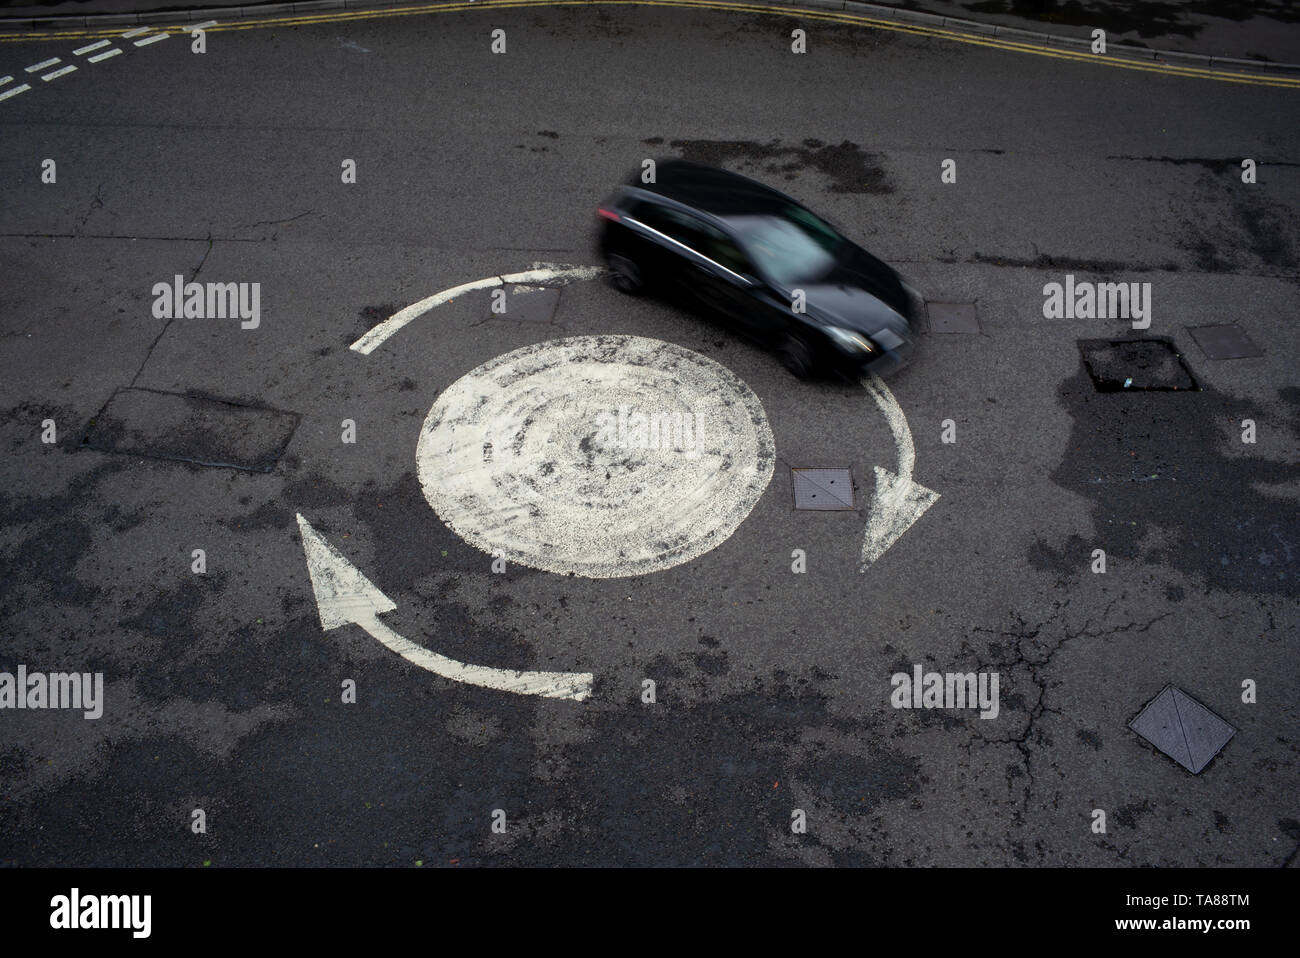 Aerial view of a painted arrowed roundabout with a single car going around. Could be used as an analogy or concept as being lost or going in circles. Stock Photo